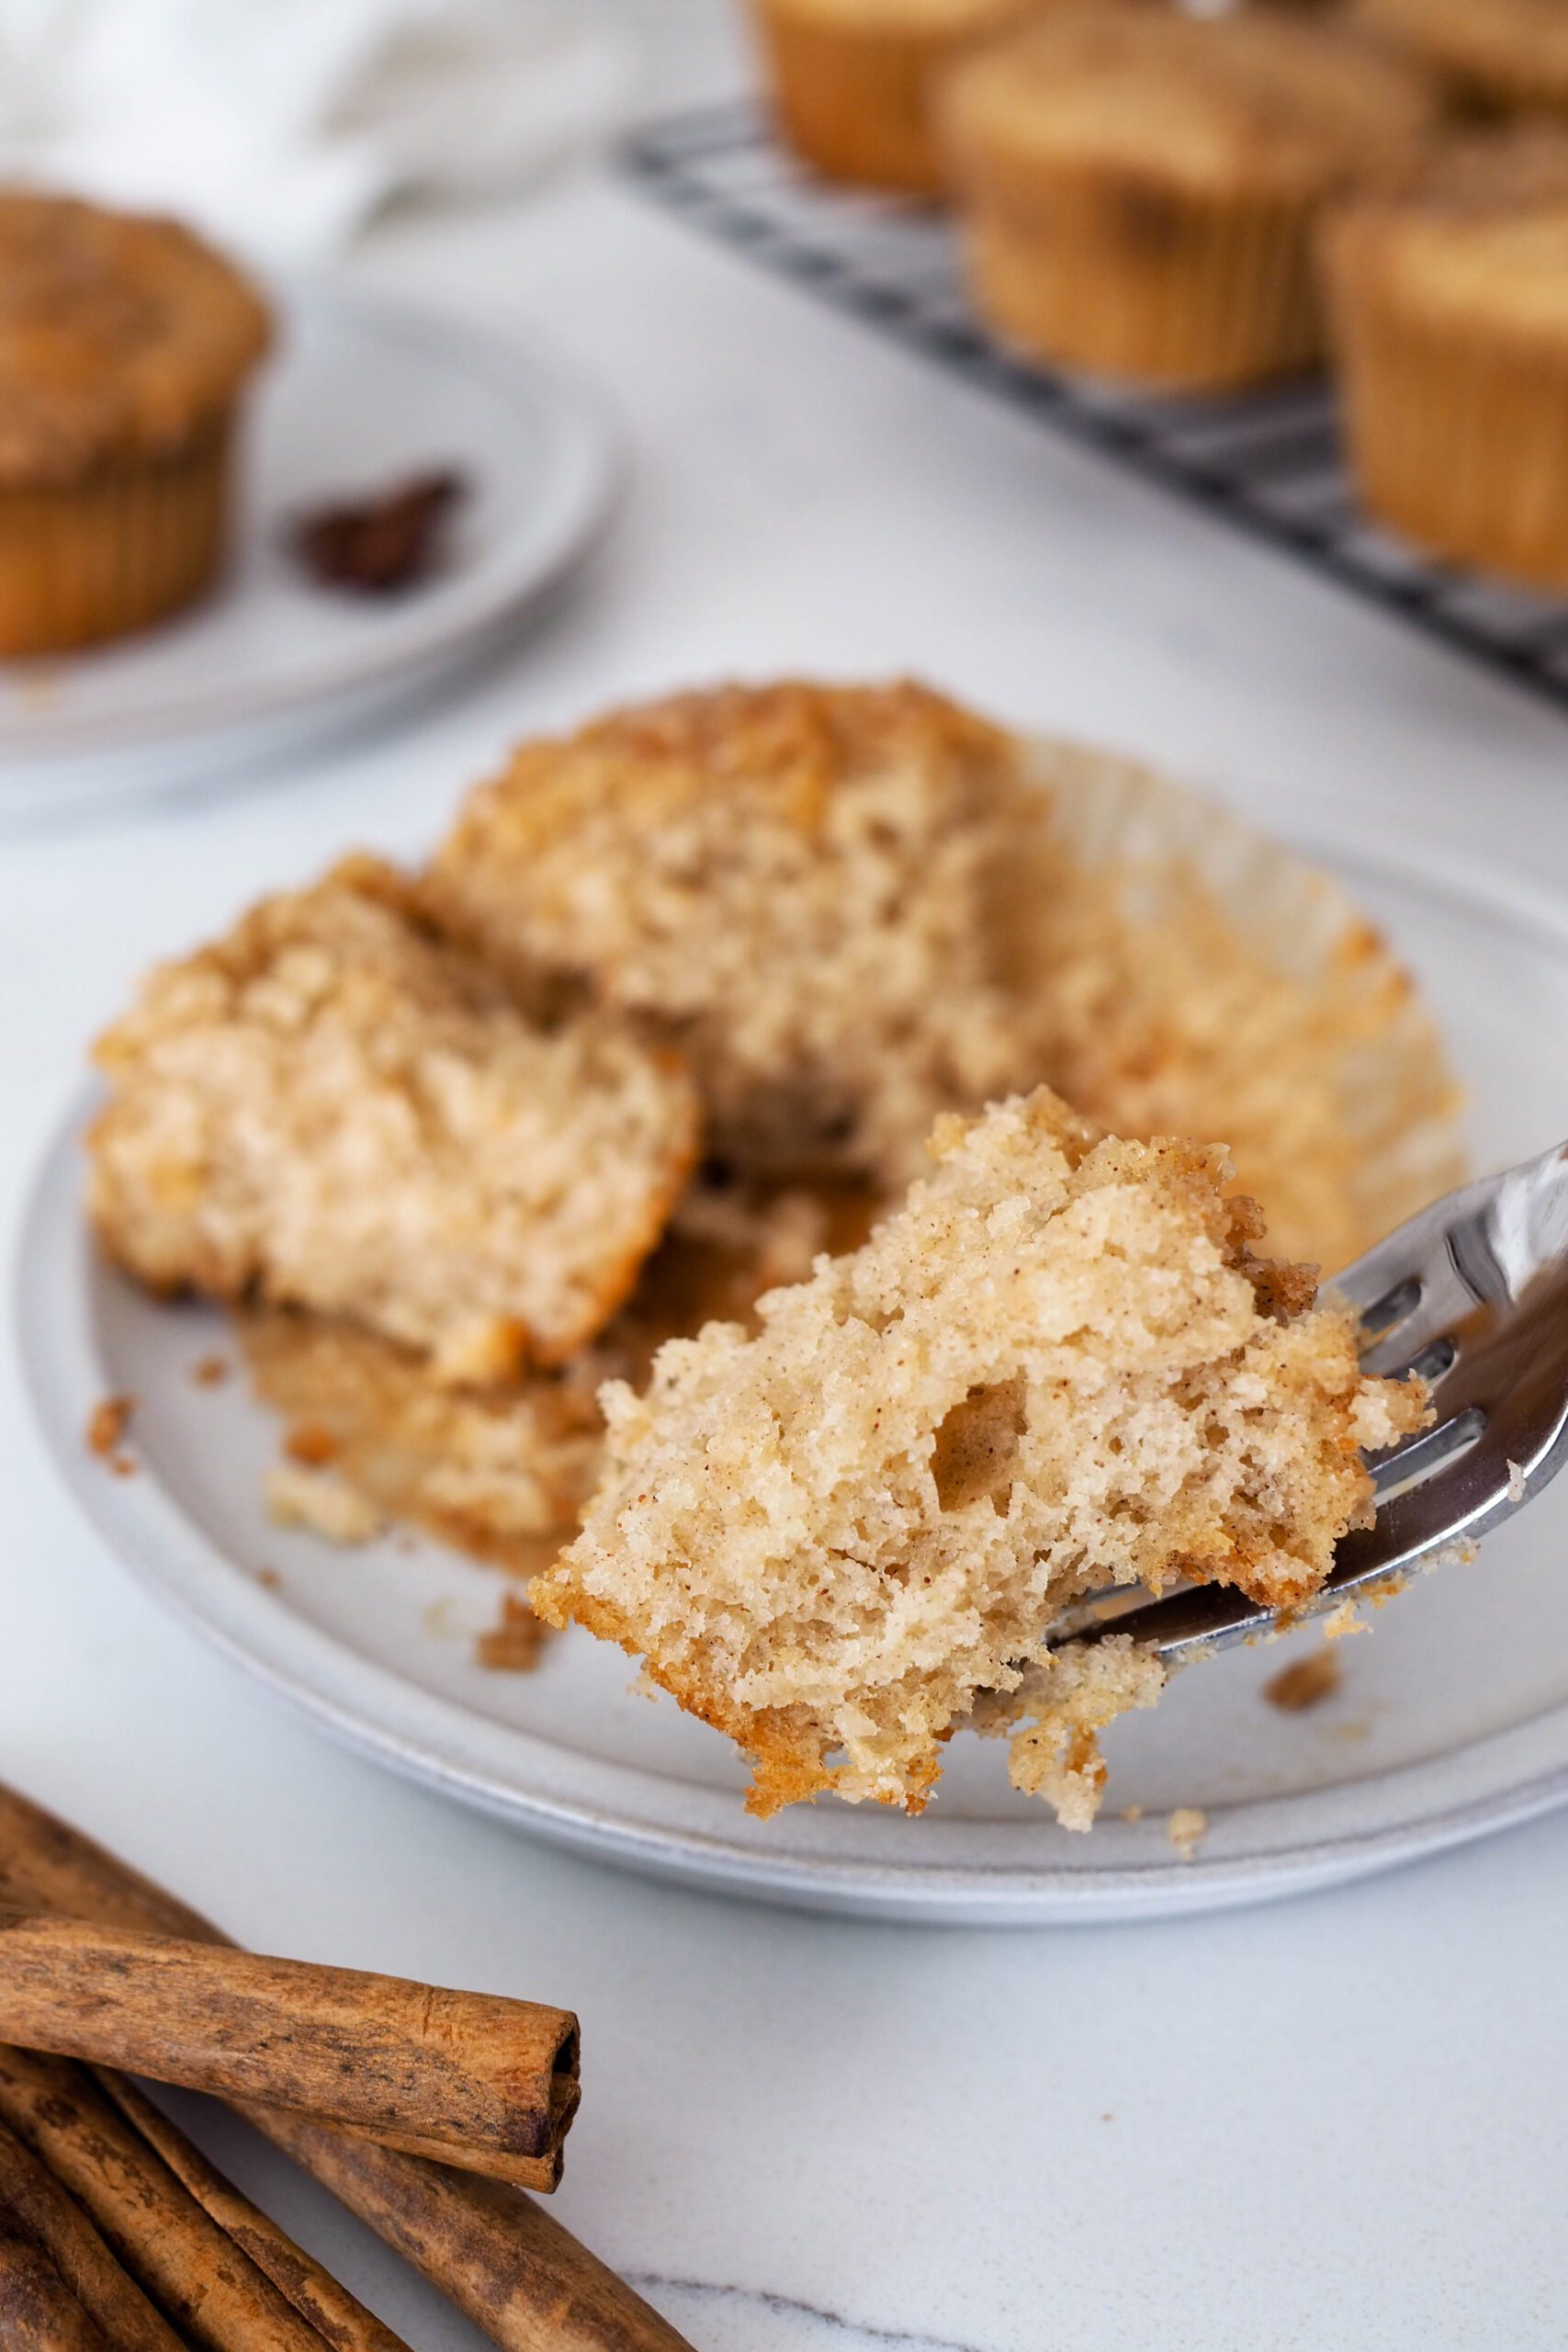 A bite of caramel chai muffin held up close to the camera with a fork.